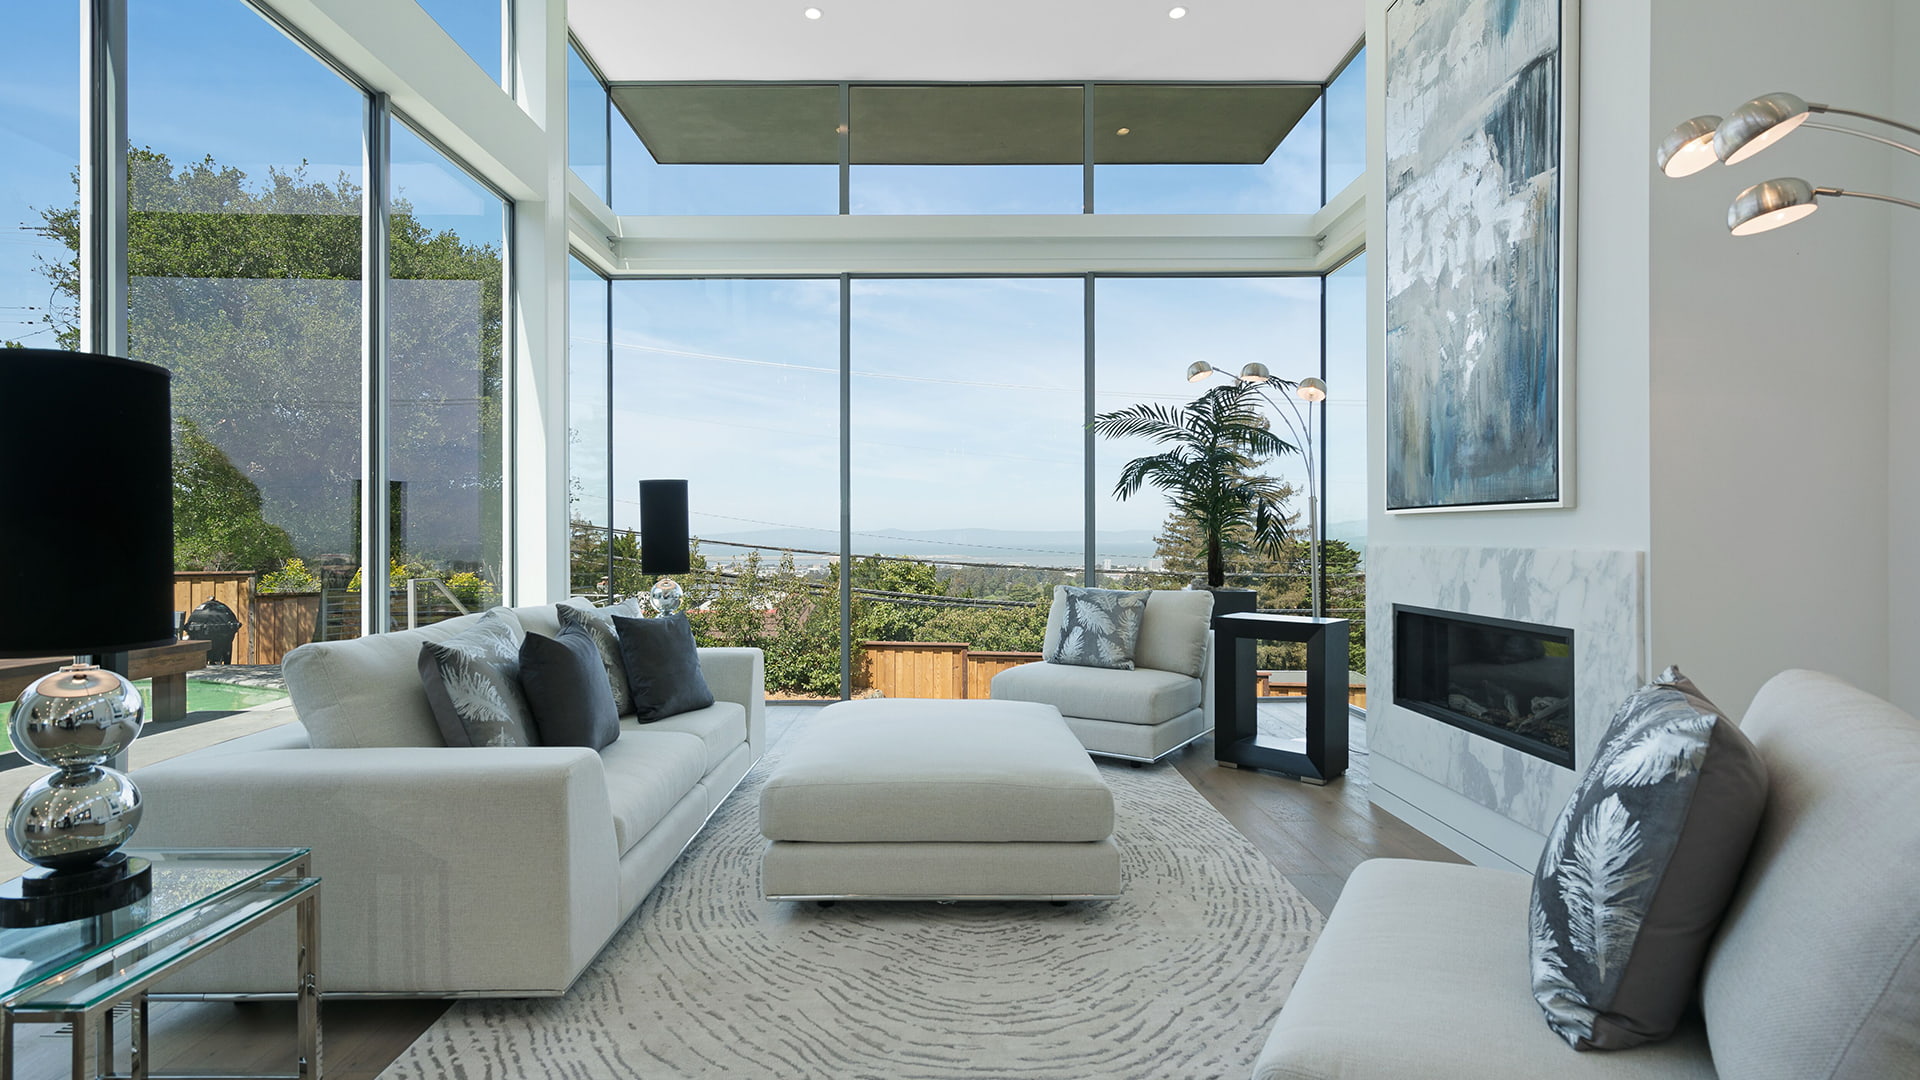 Window walls surround a living room with a white sofa and several accent pillows